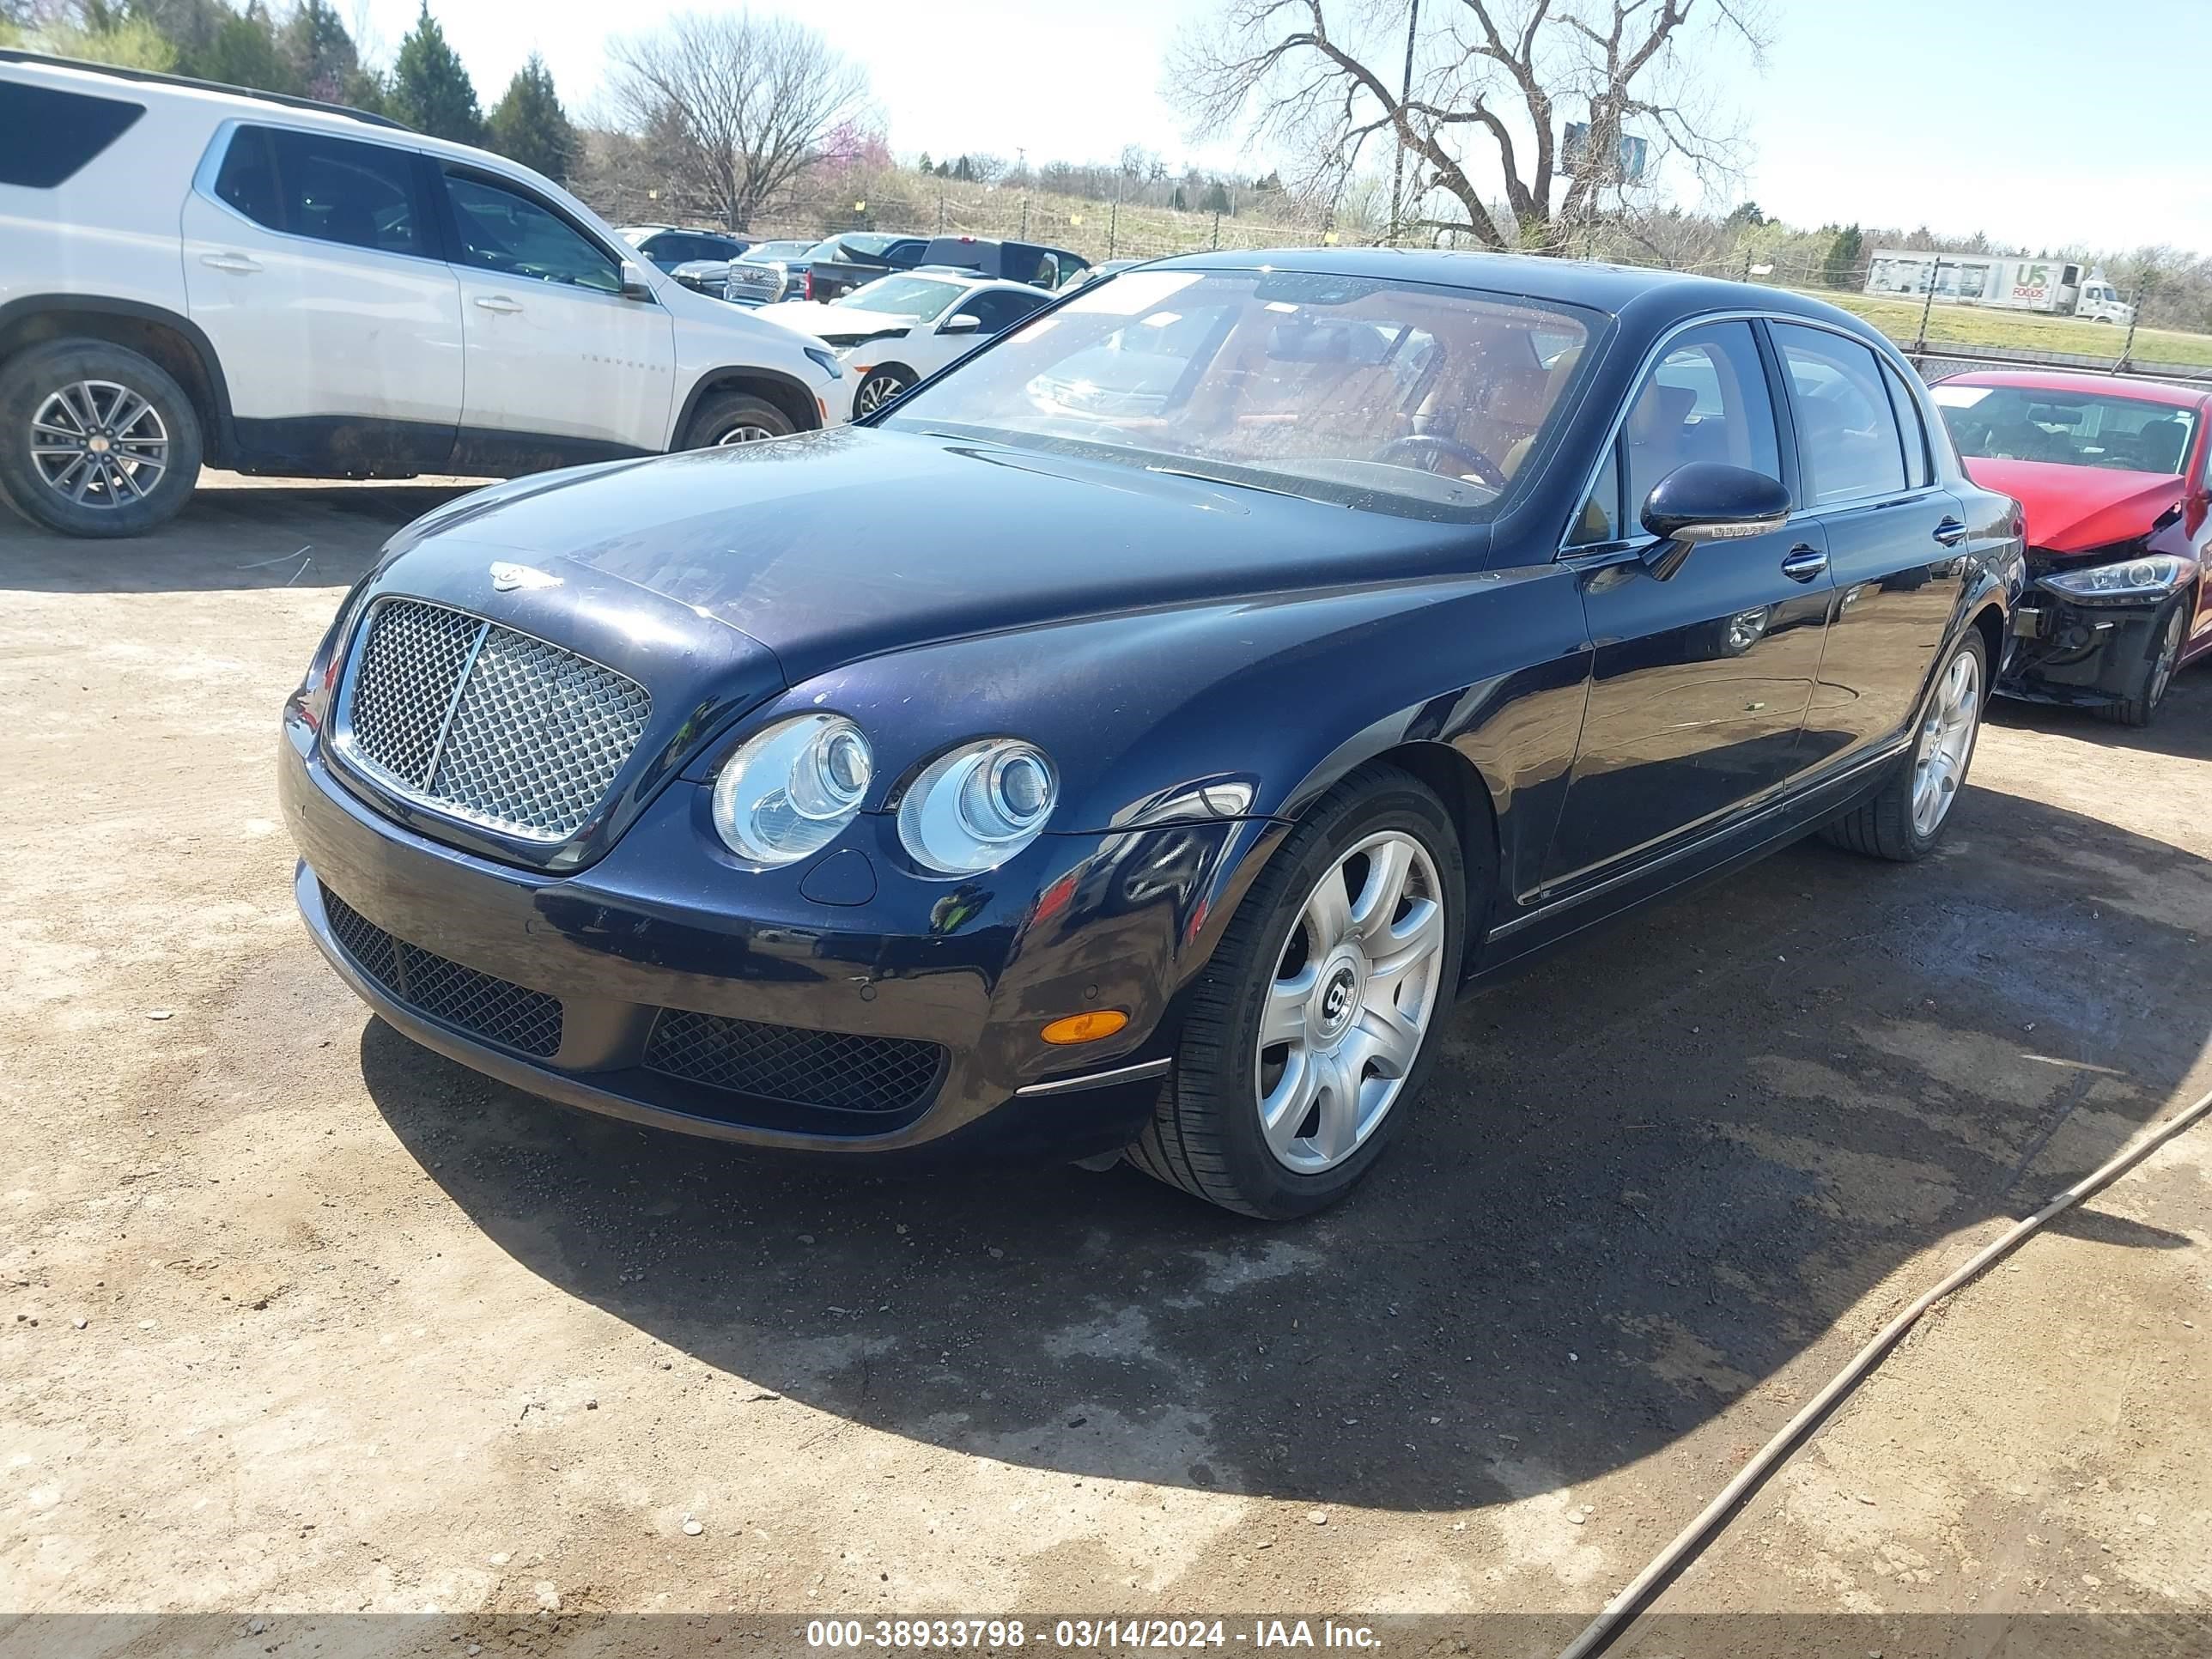 Photo 1 VIN: SCBBR53W46C034805 - BENTLEY CONTINENTAL FLYING SPUR 